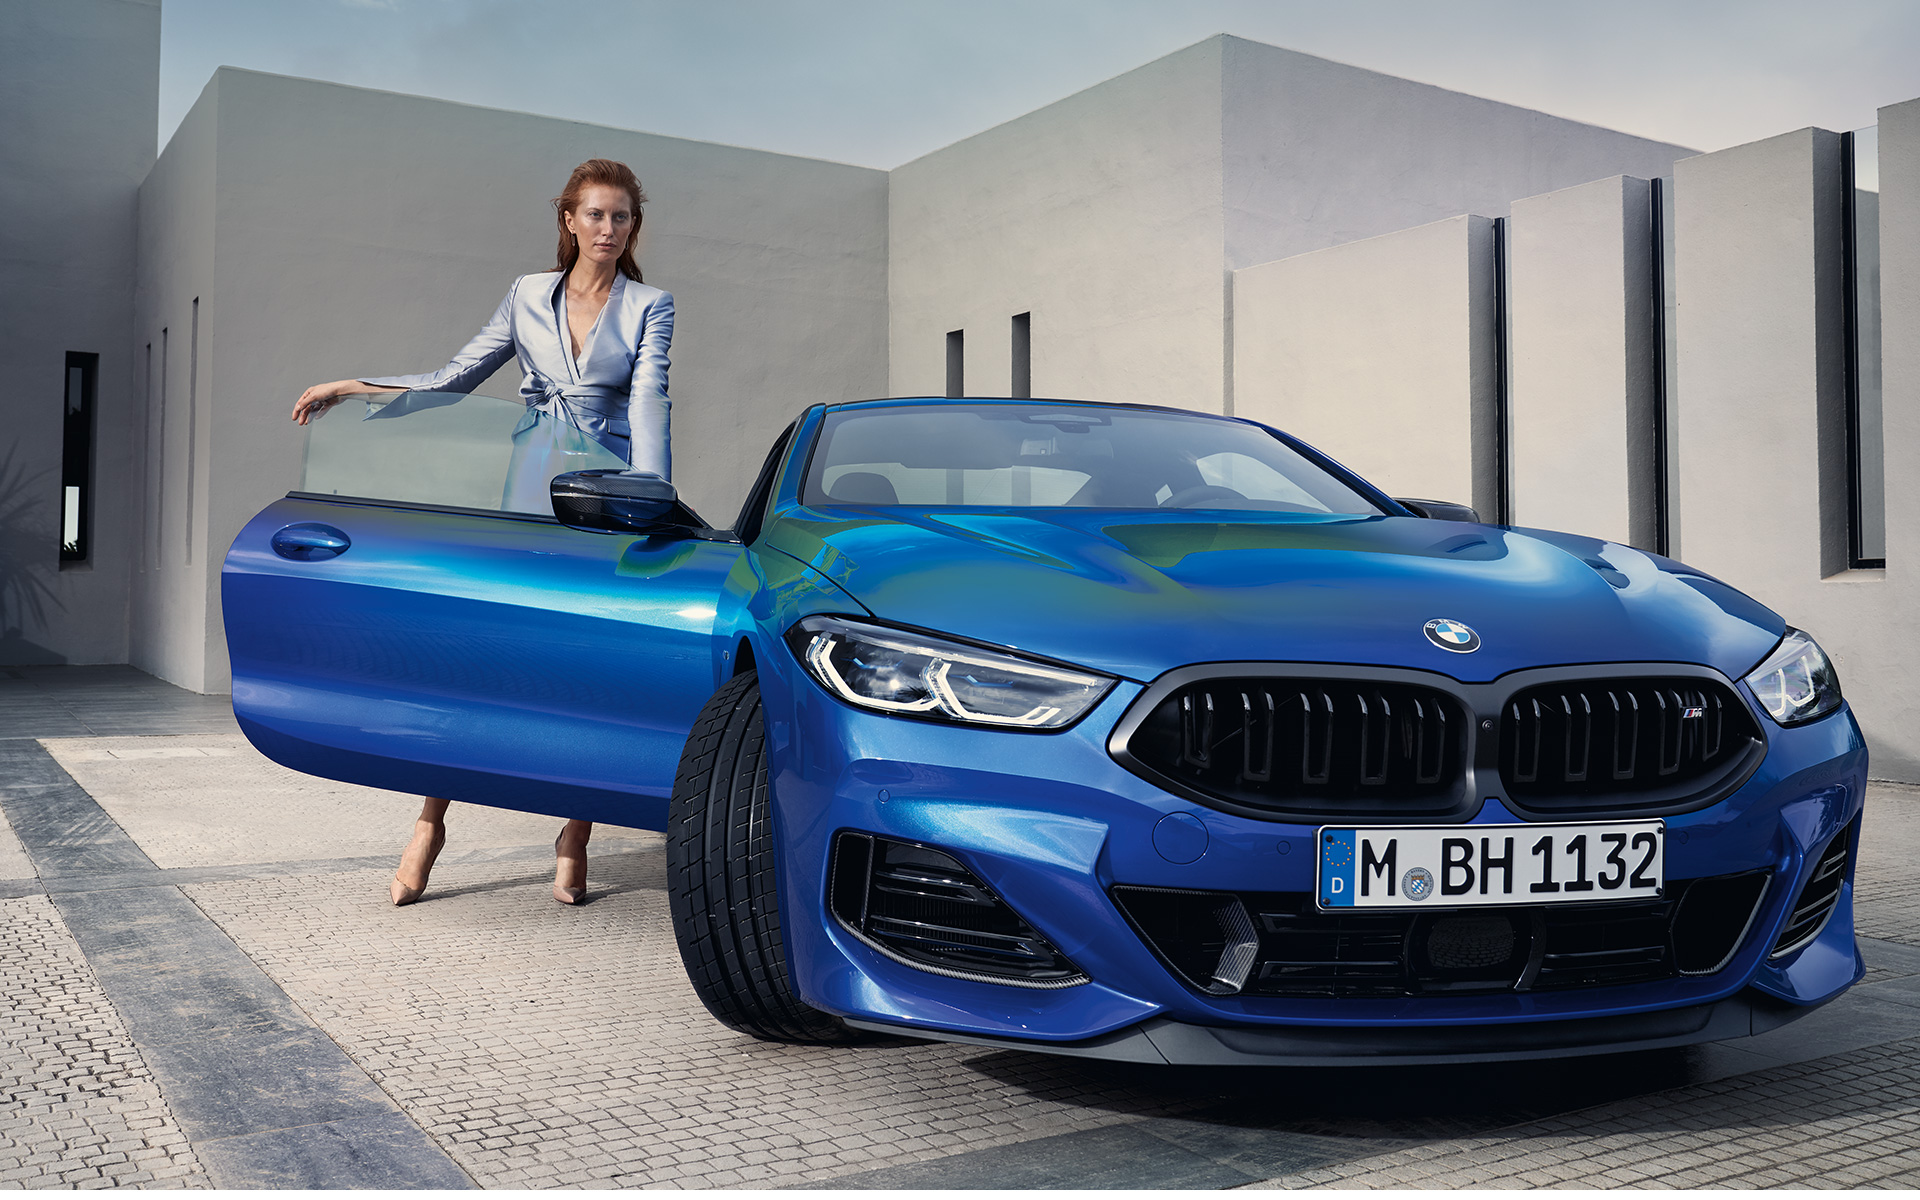 BMW M850i xDrive Coupé G15 LCI Facelift 2022 M Portimao Blue metallic front view standing with female model in open front door